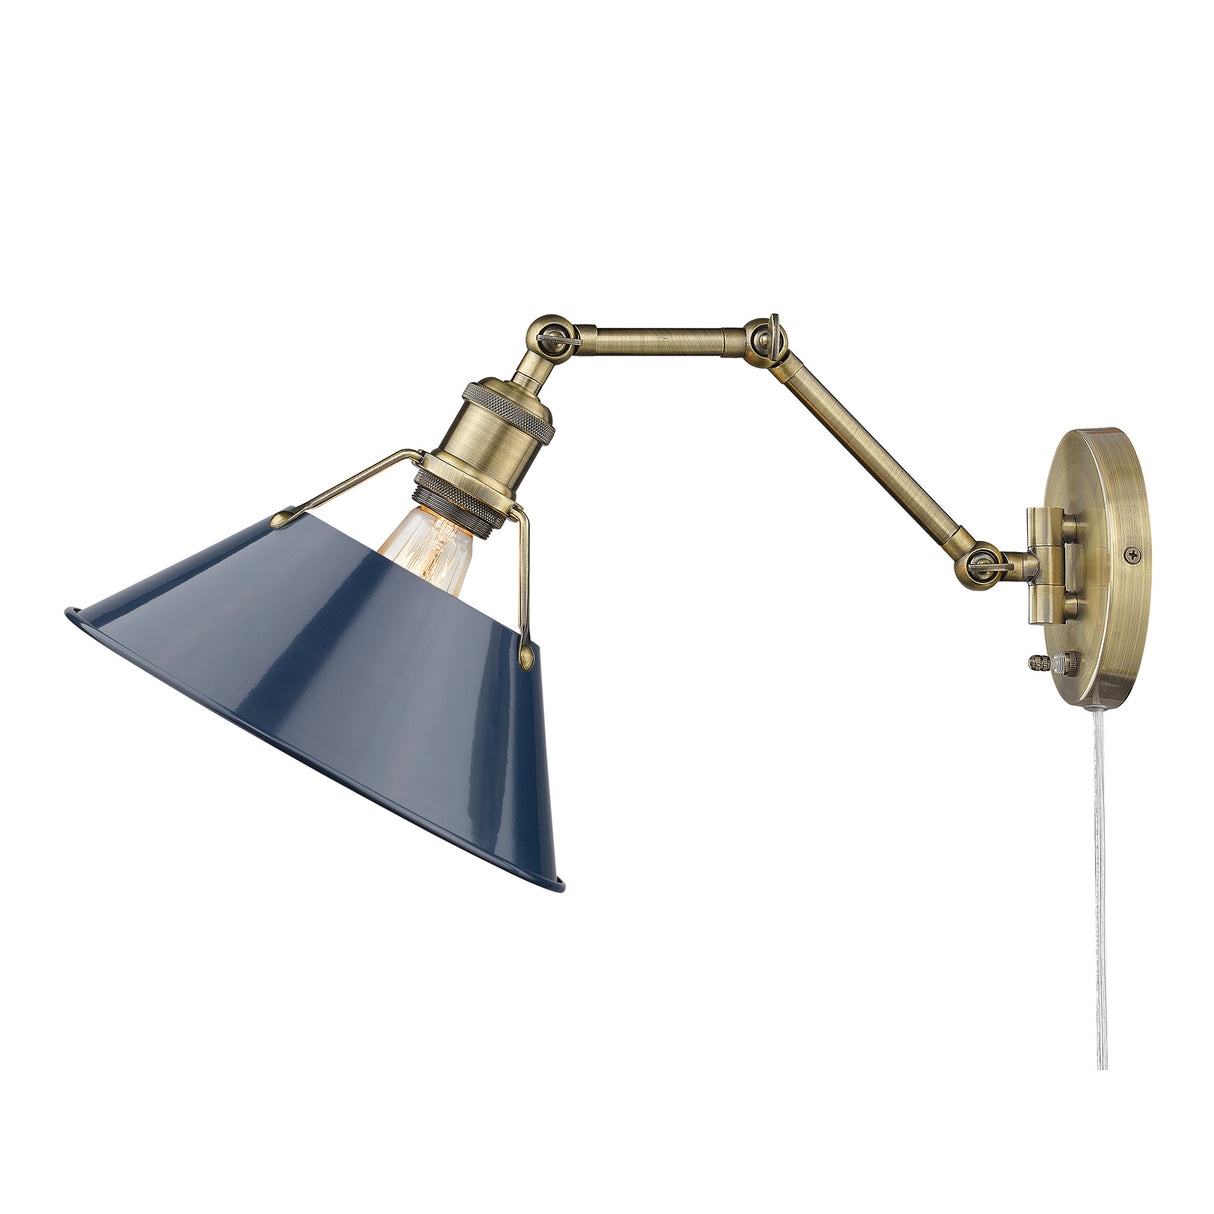 Orwell AB Articulating 1 Light Wall Sconce with Matte Navy Shade